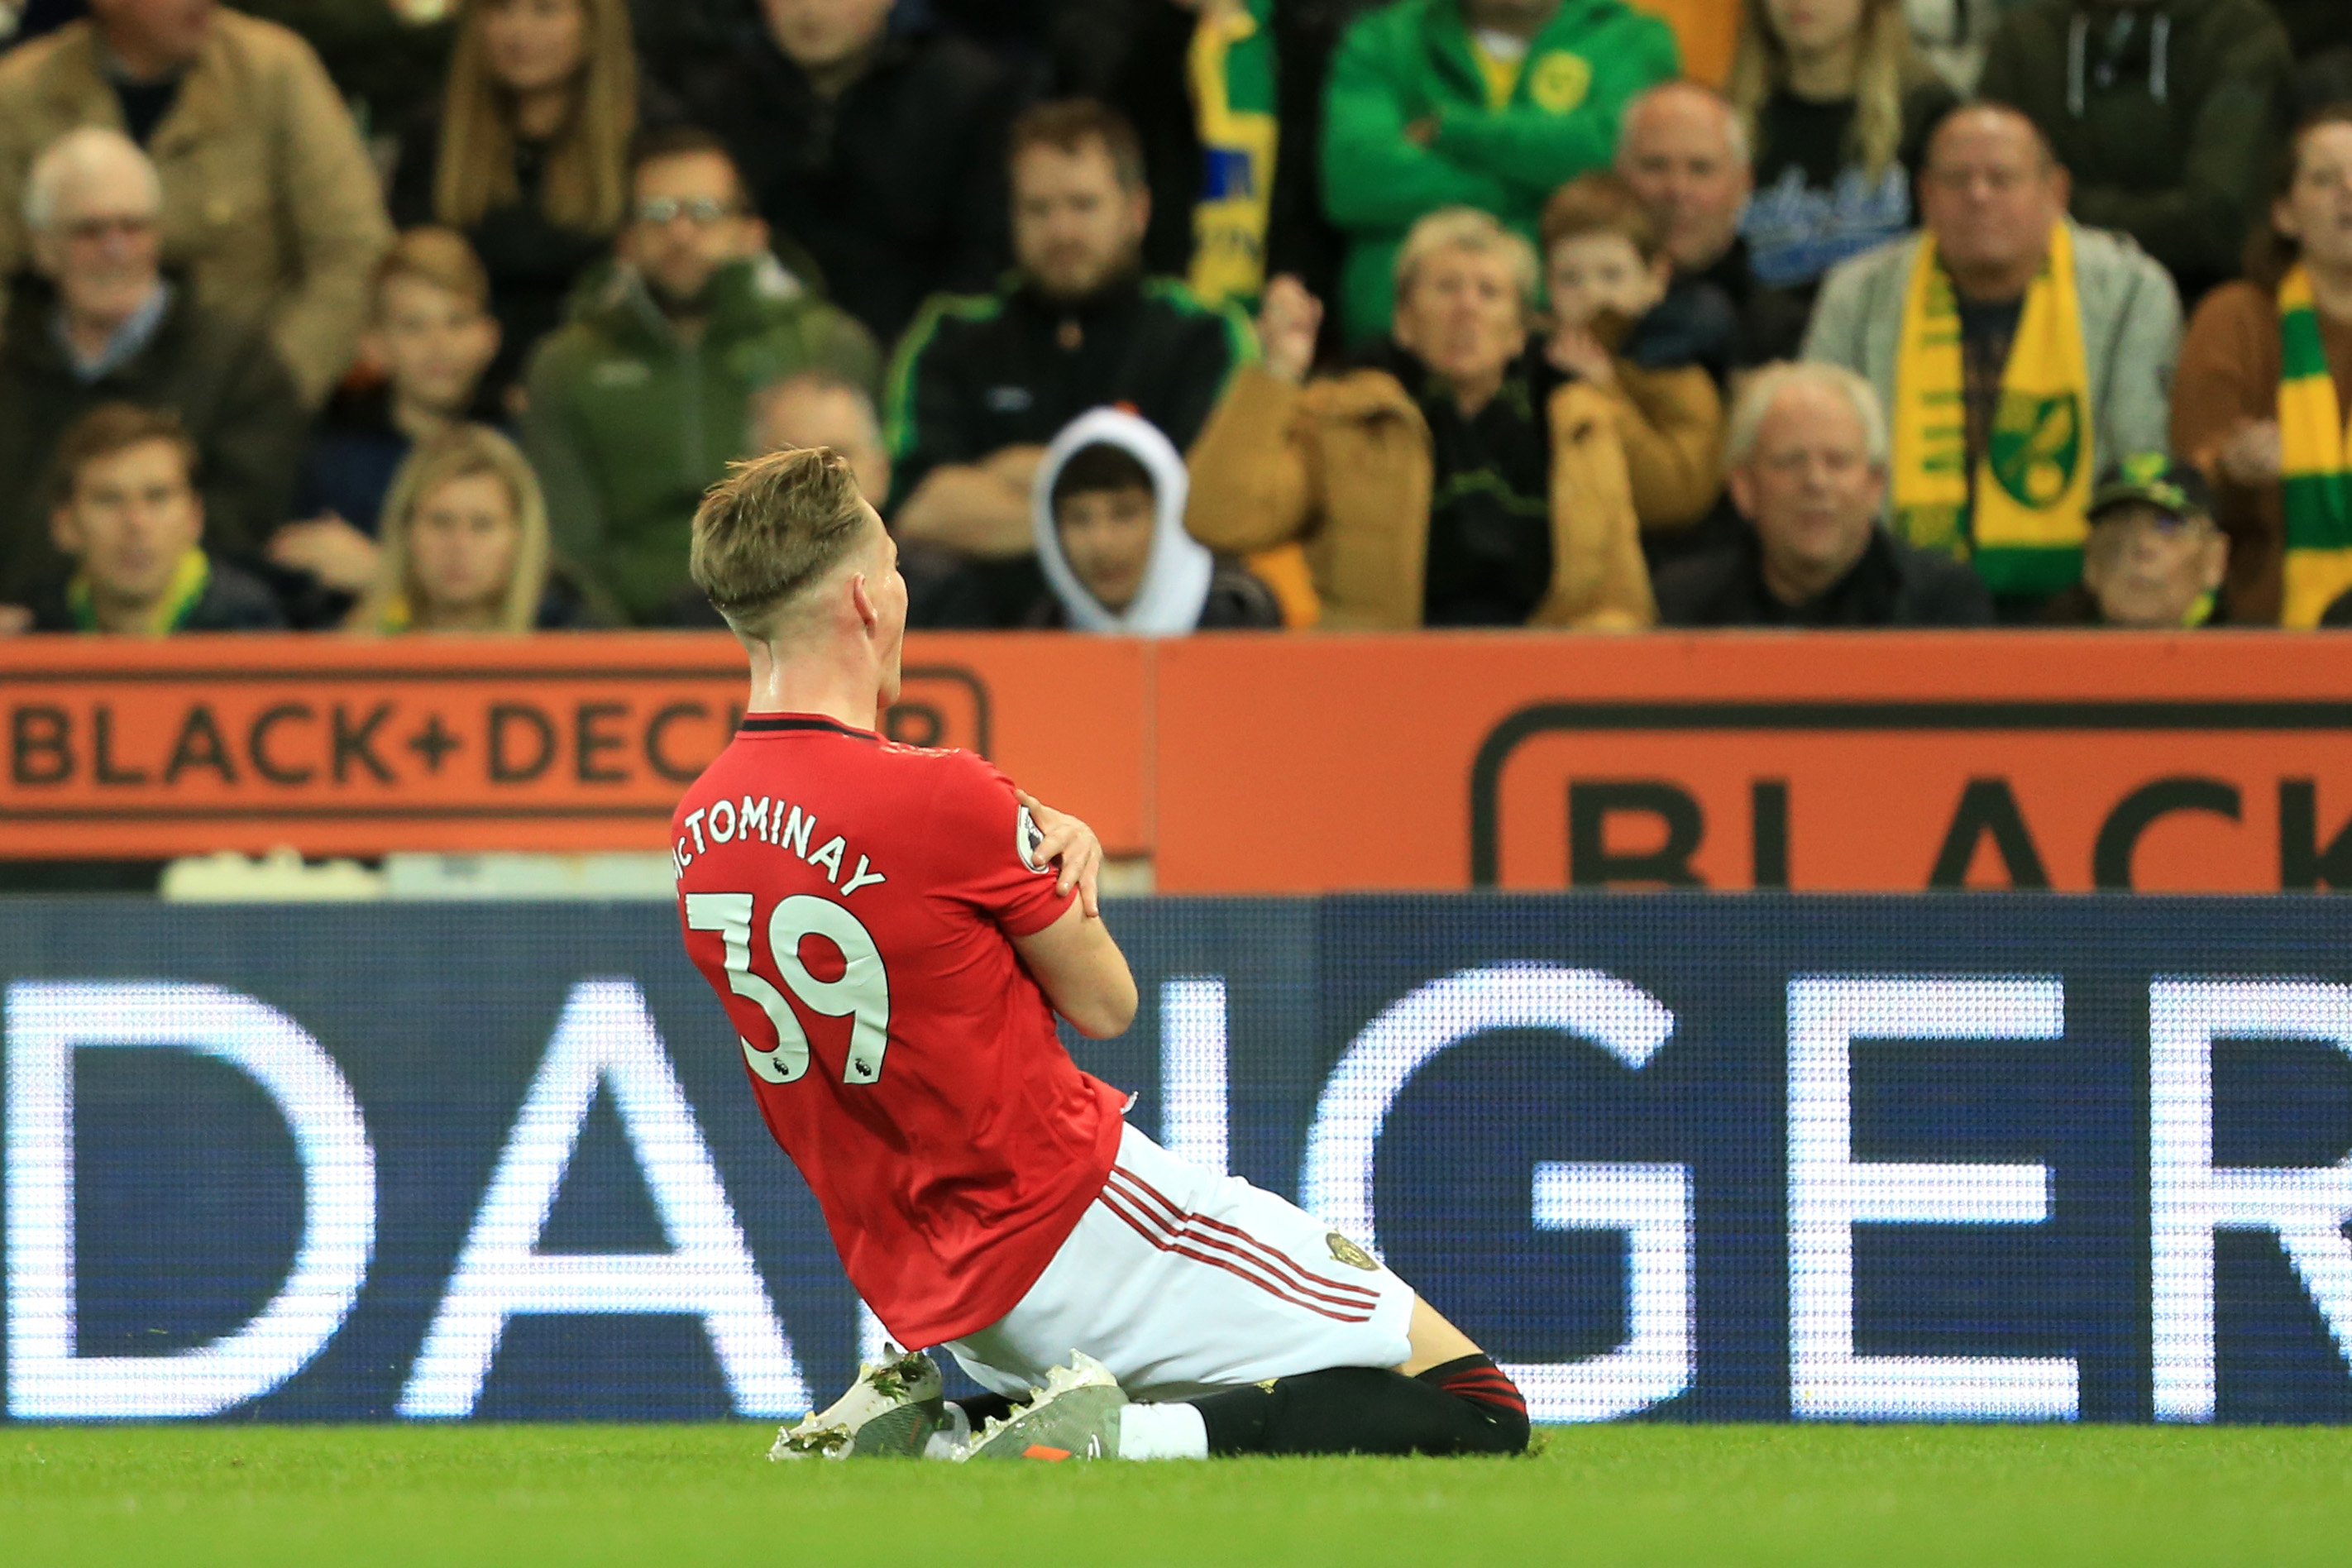 McTominay scored Manchester United's 2000th Premier League goal (Photo by Stephen Pond/Getty Images)